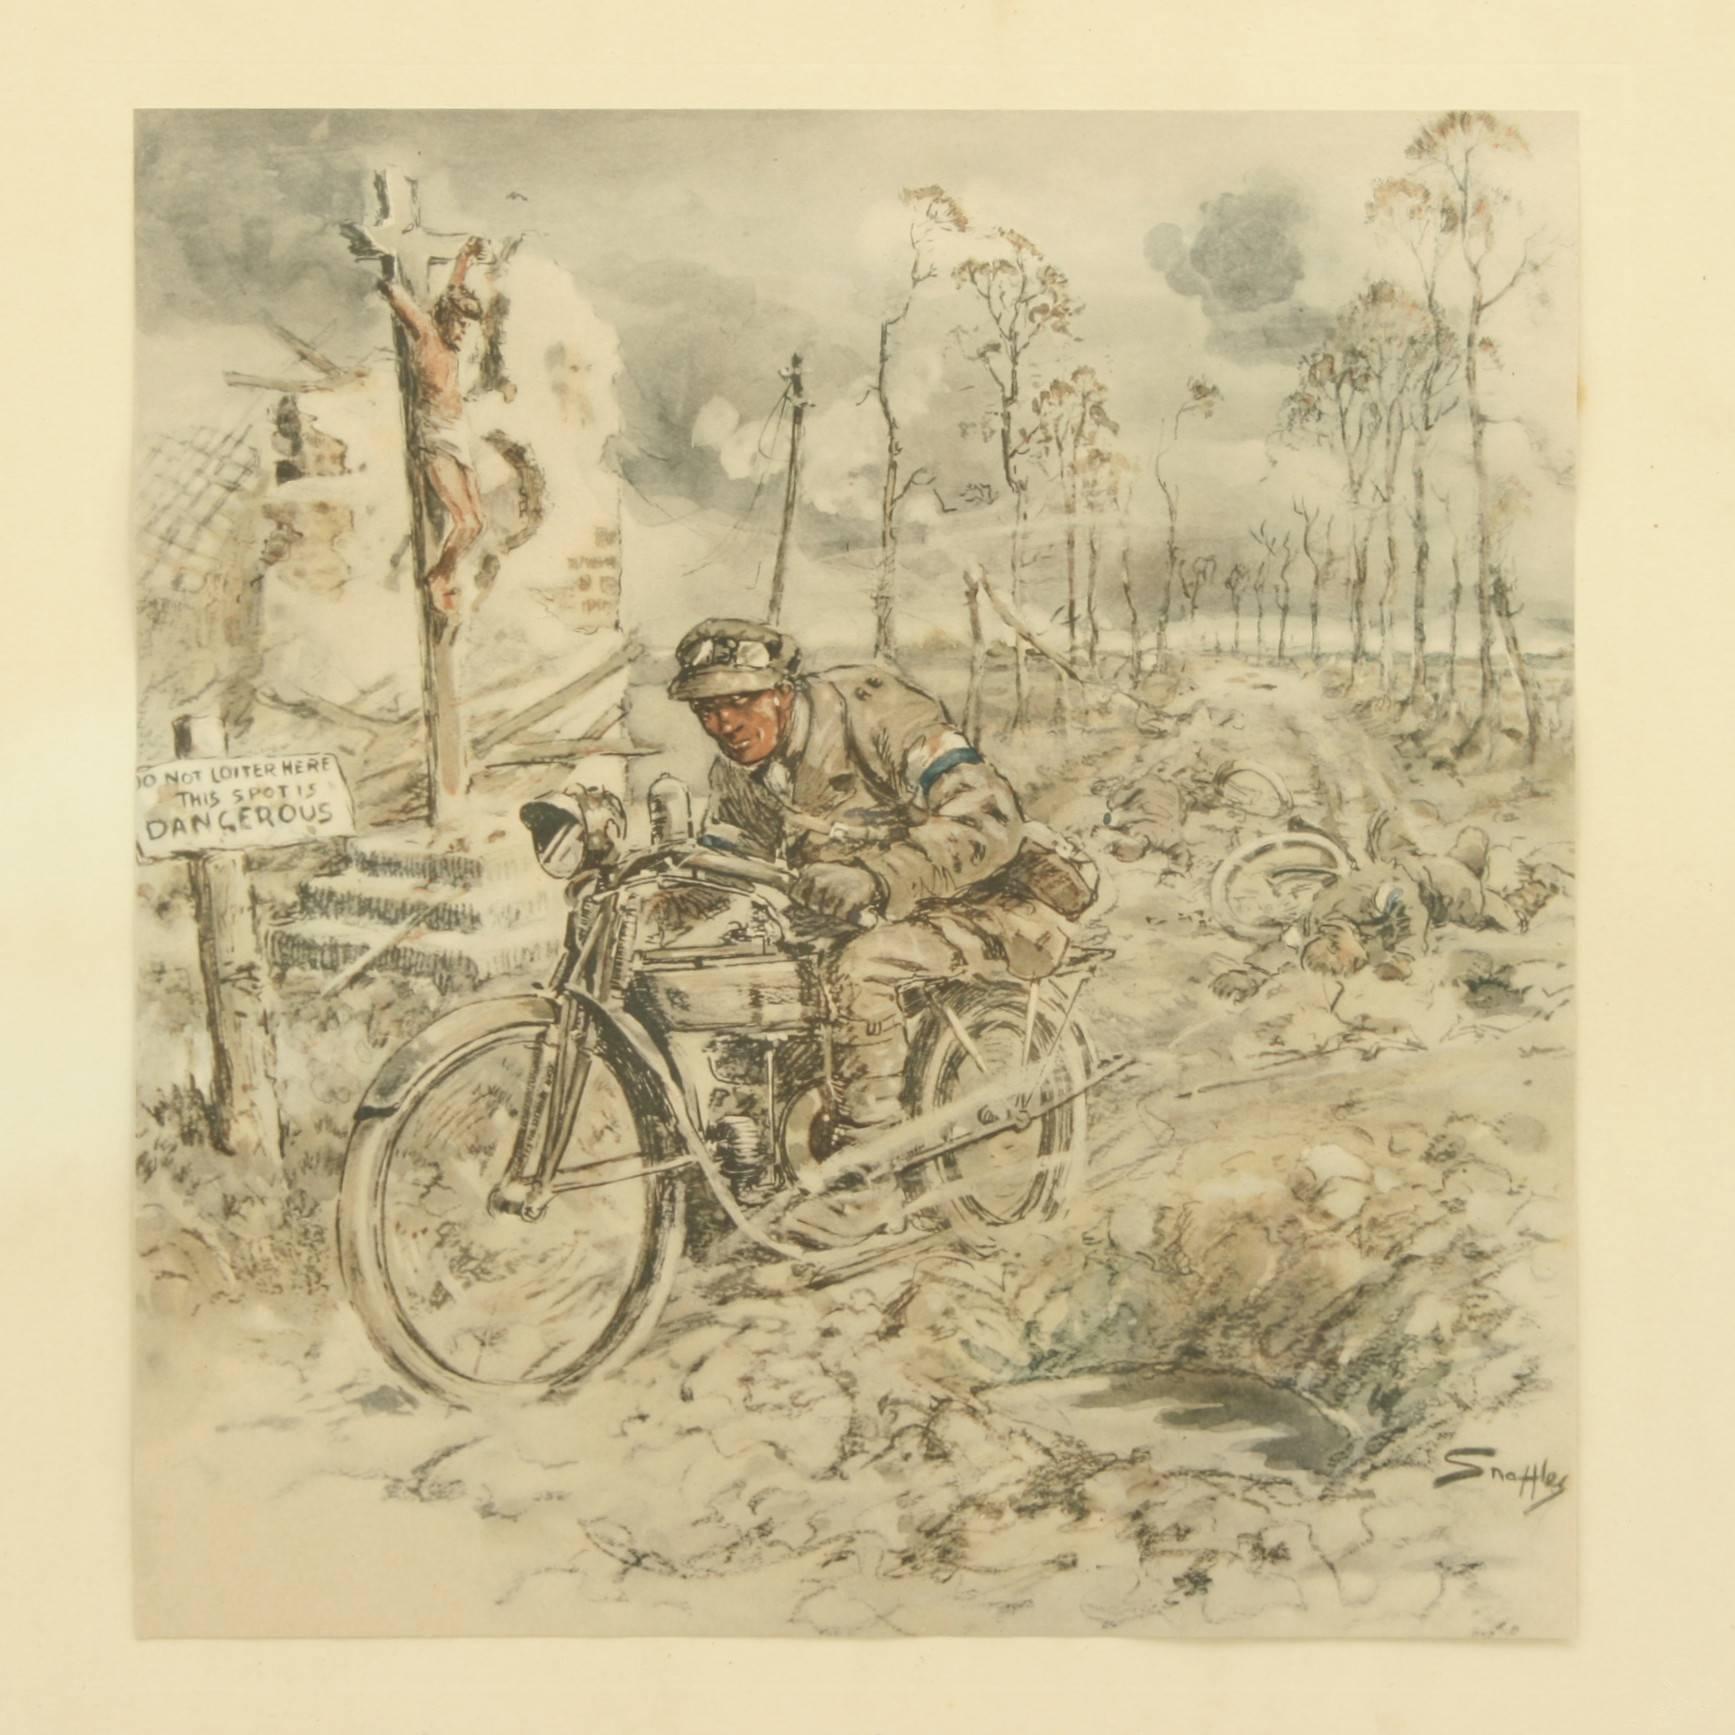 A good hand colored Snaffles WWI military print 'The D.R.'. The lithograph shows a despatch rider on a motor cycle racing past two dead riders in the road, a sign saying 